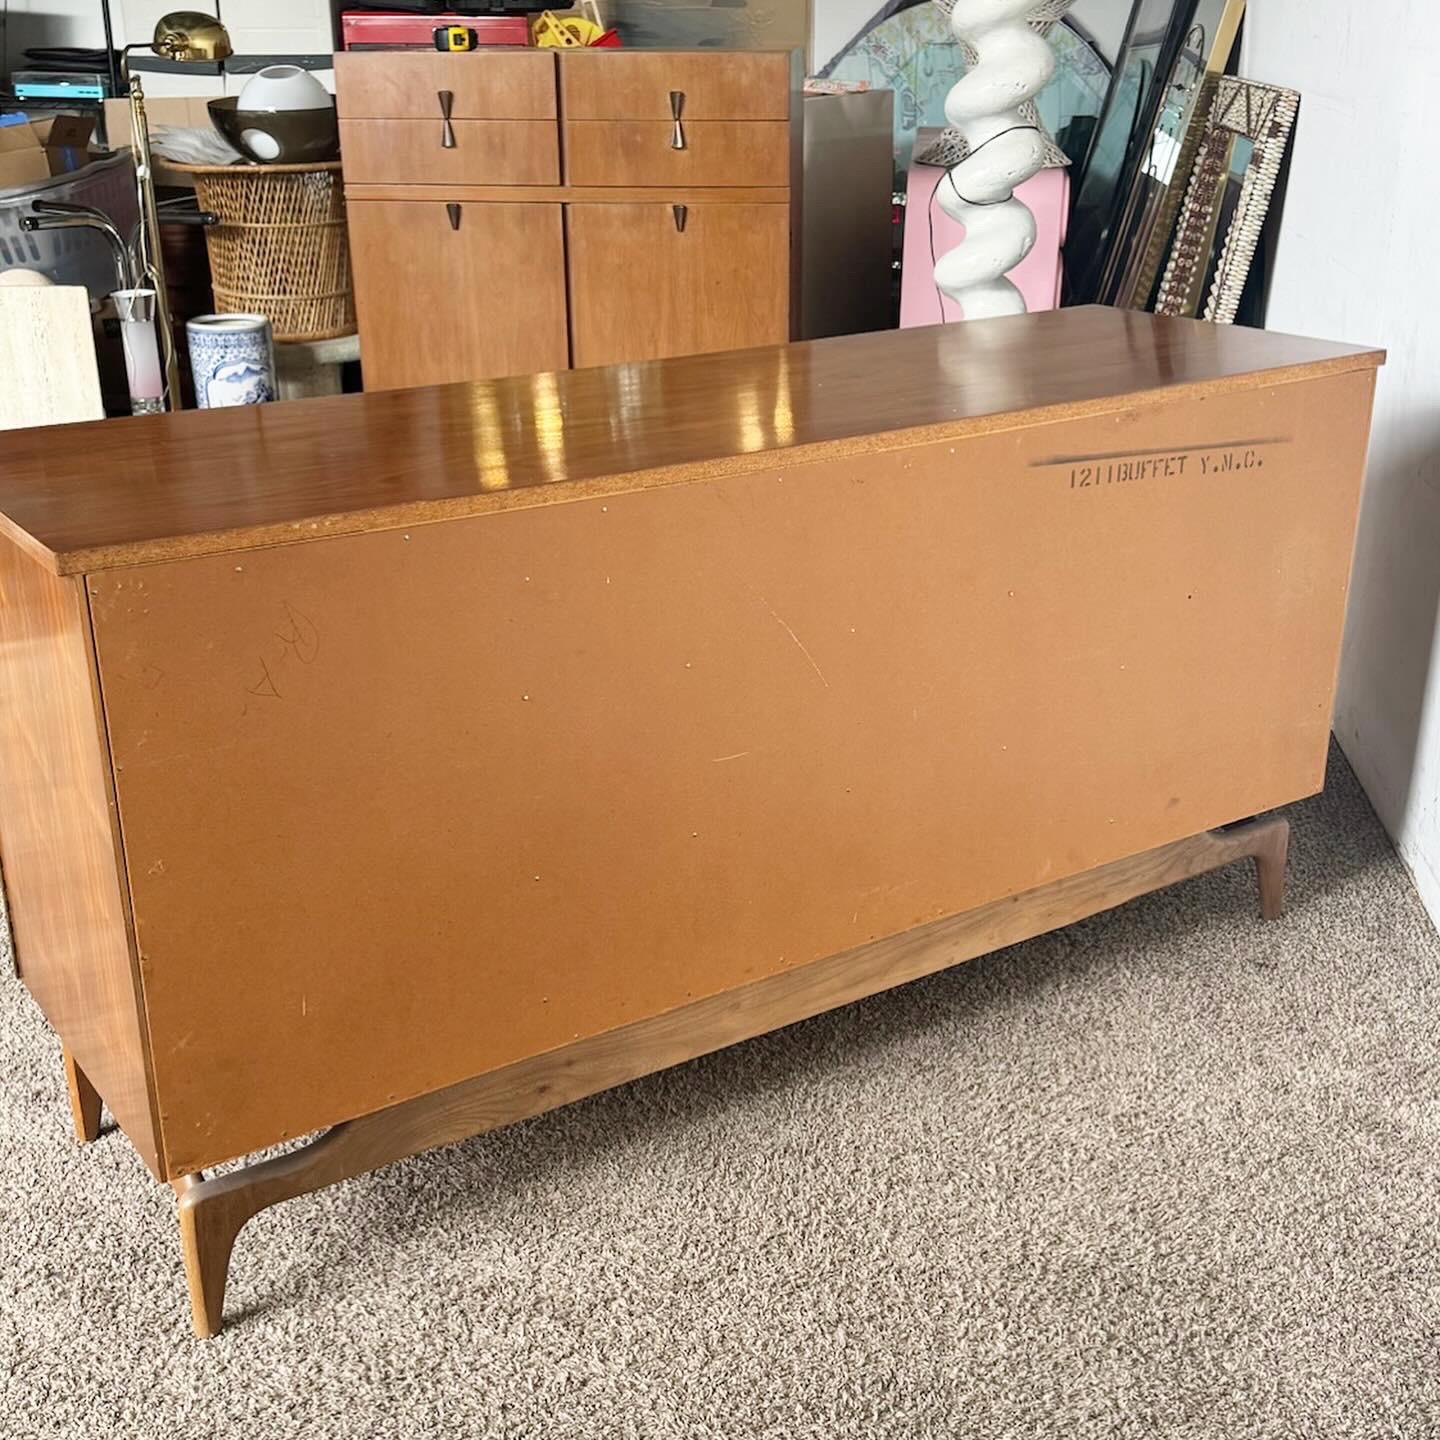 The 1960s North American Mid Century Modern Walnut Credenza is a timeless piece, embodying mid-century design. Crafted with durable walnut, it features sculpted drawer pulls and ample storage. This credenza stands on four elegant legs, perfect for